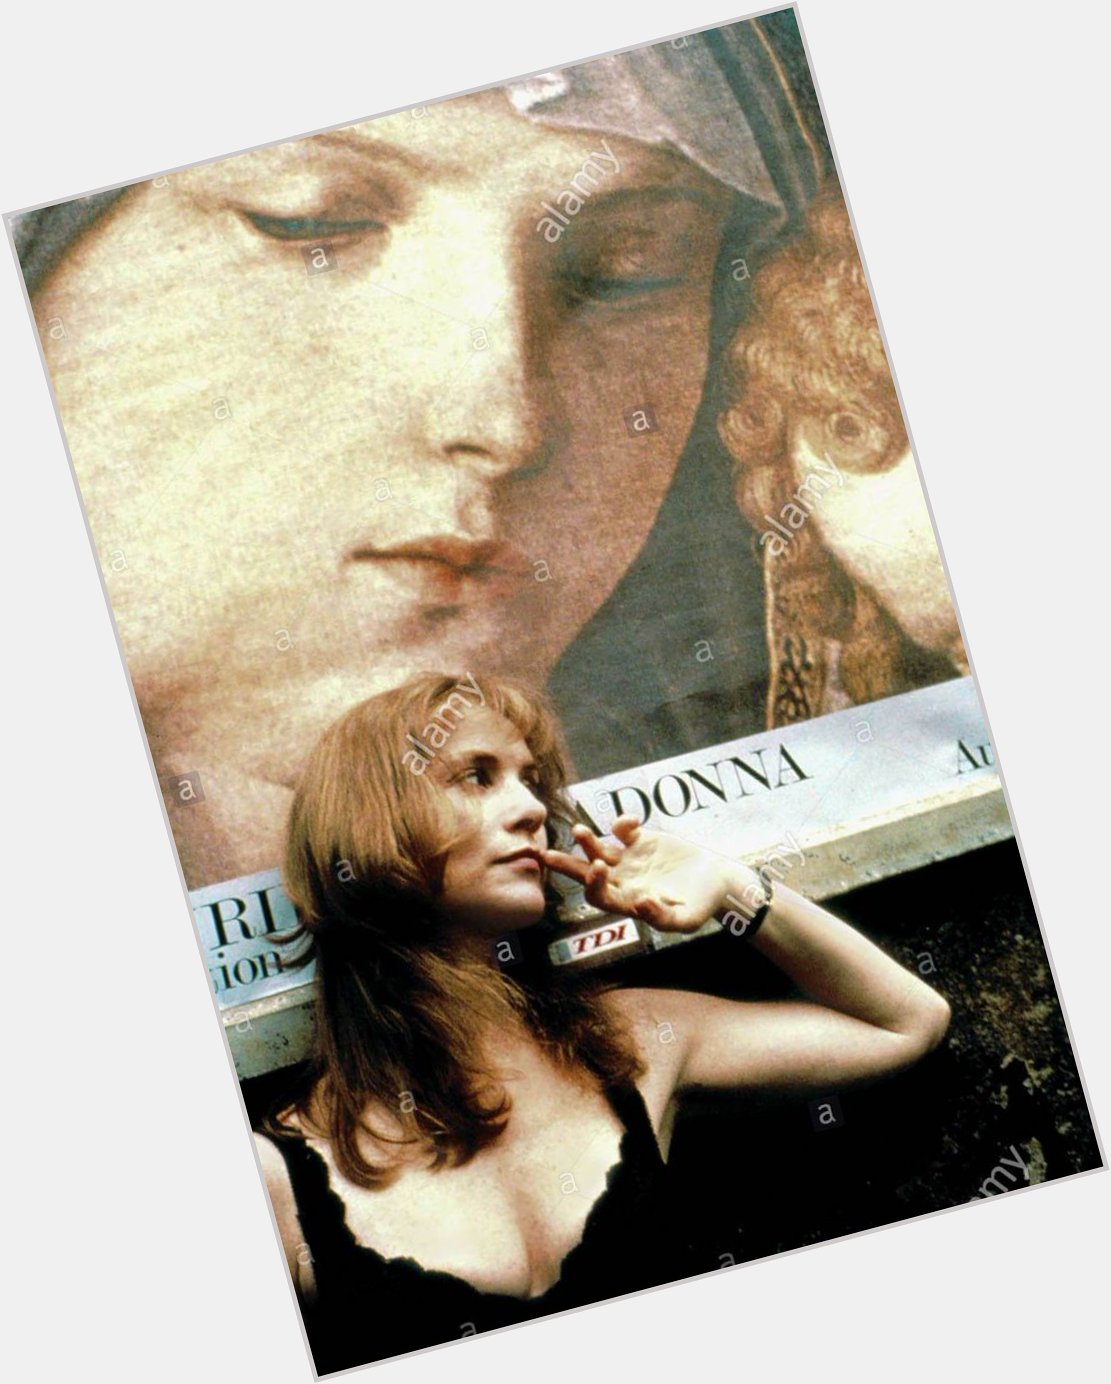 Happy birthday to the incomparable Isabelle Huppert. The first movie I saw her in was, strangely, an American one. 